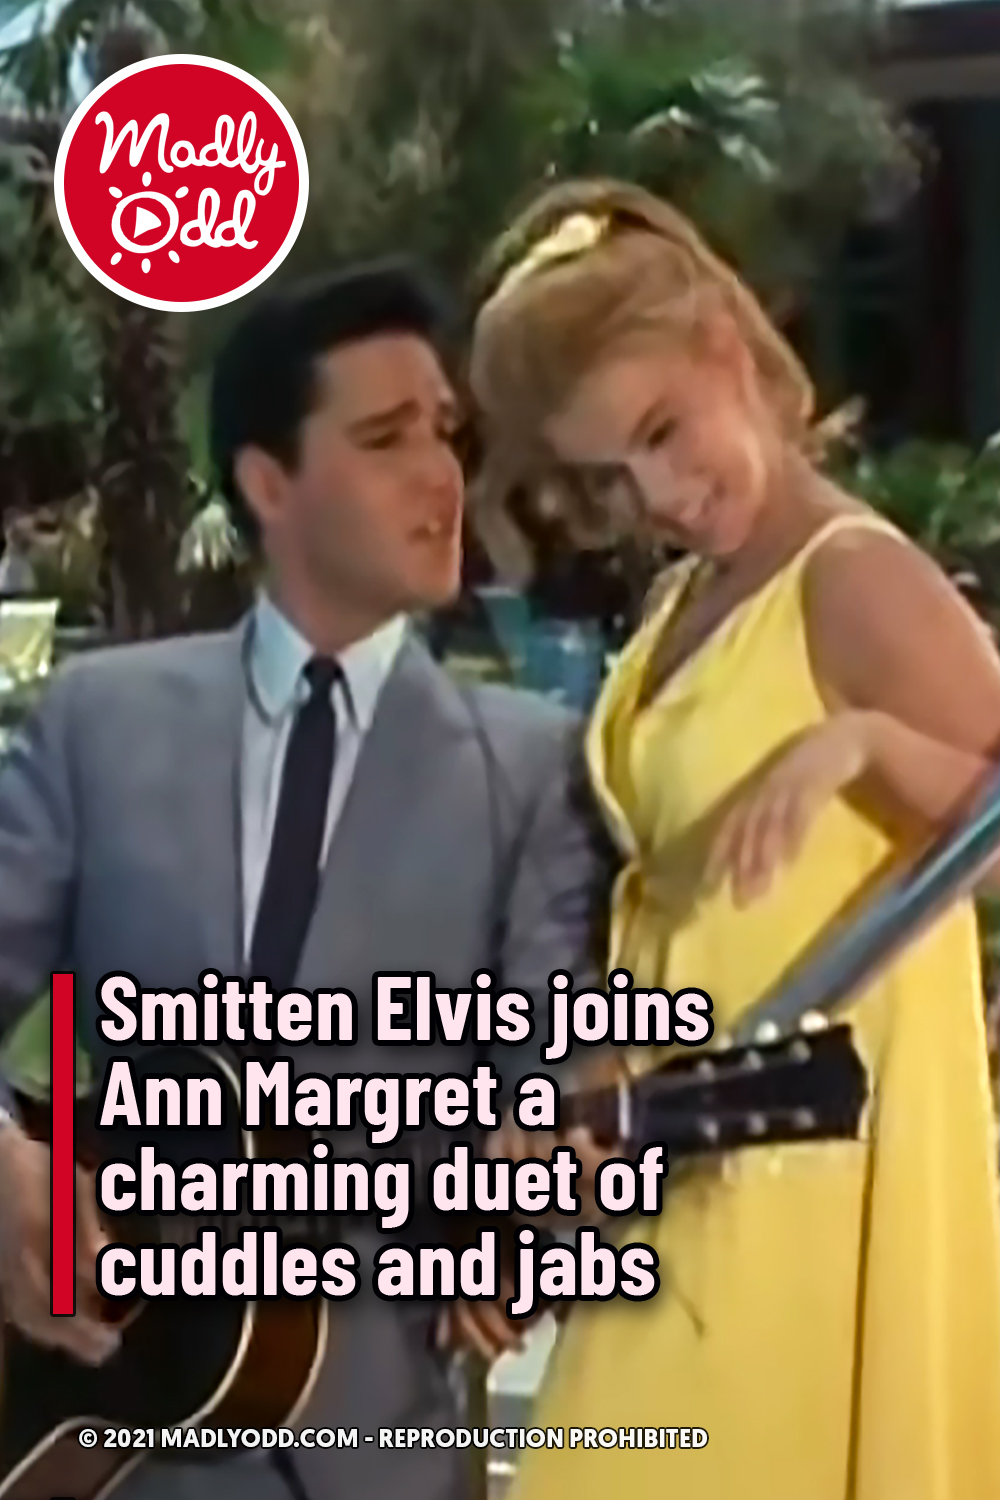 Smitten Elvis joins Ann Margret a charming duet of cuddles and jabs